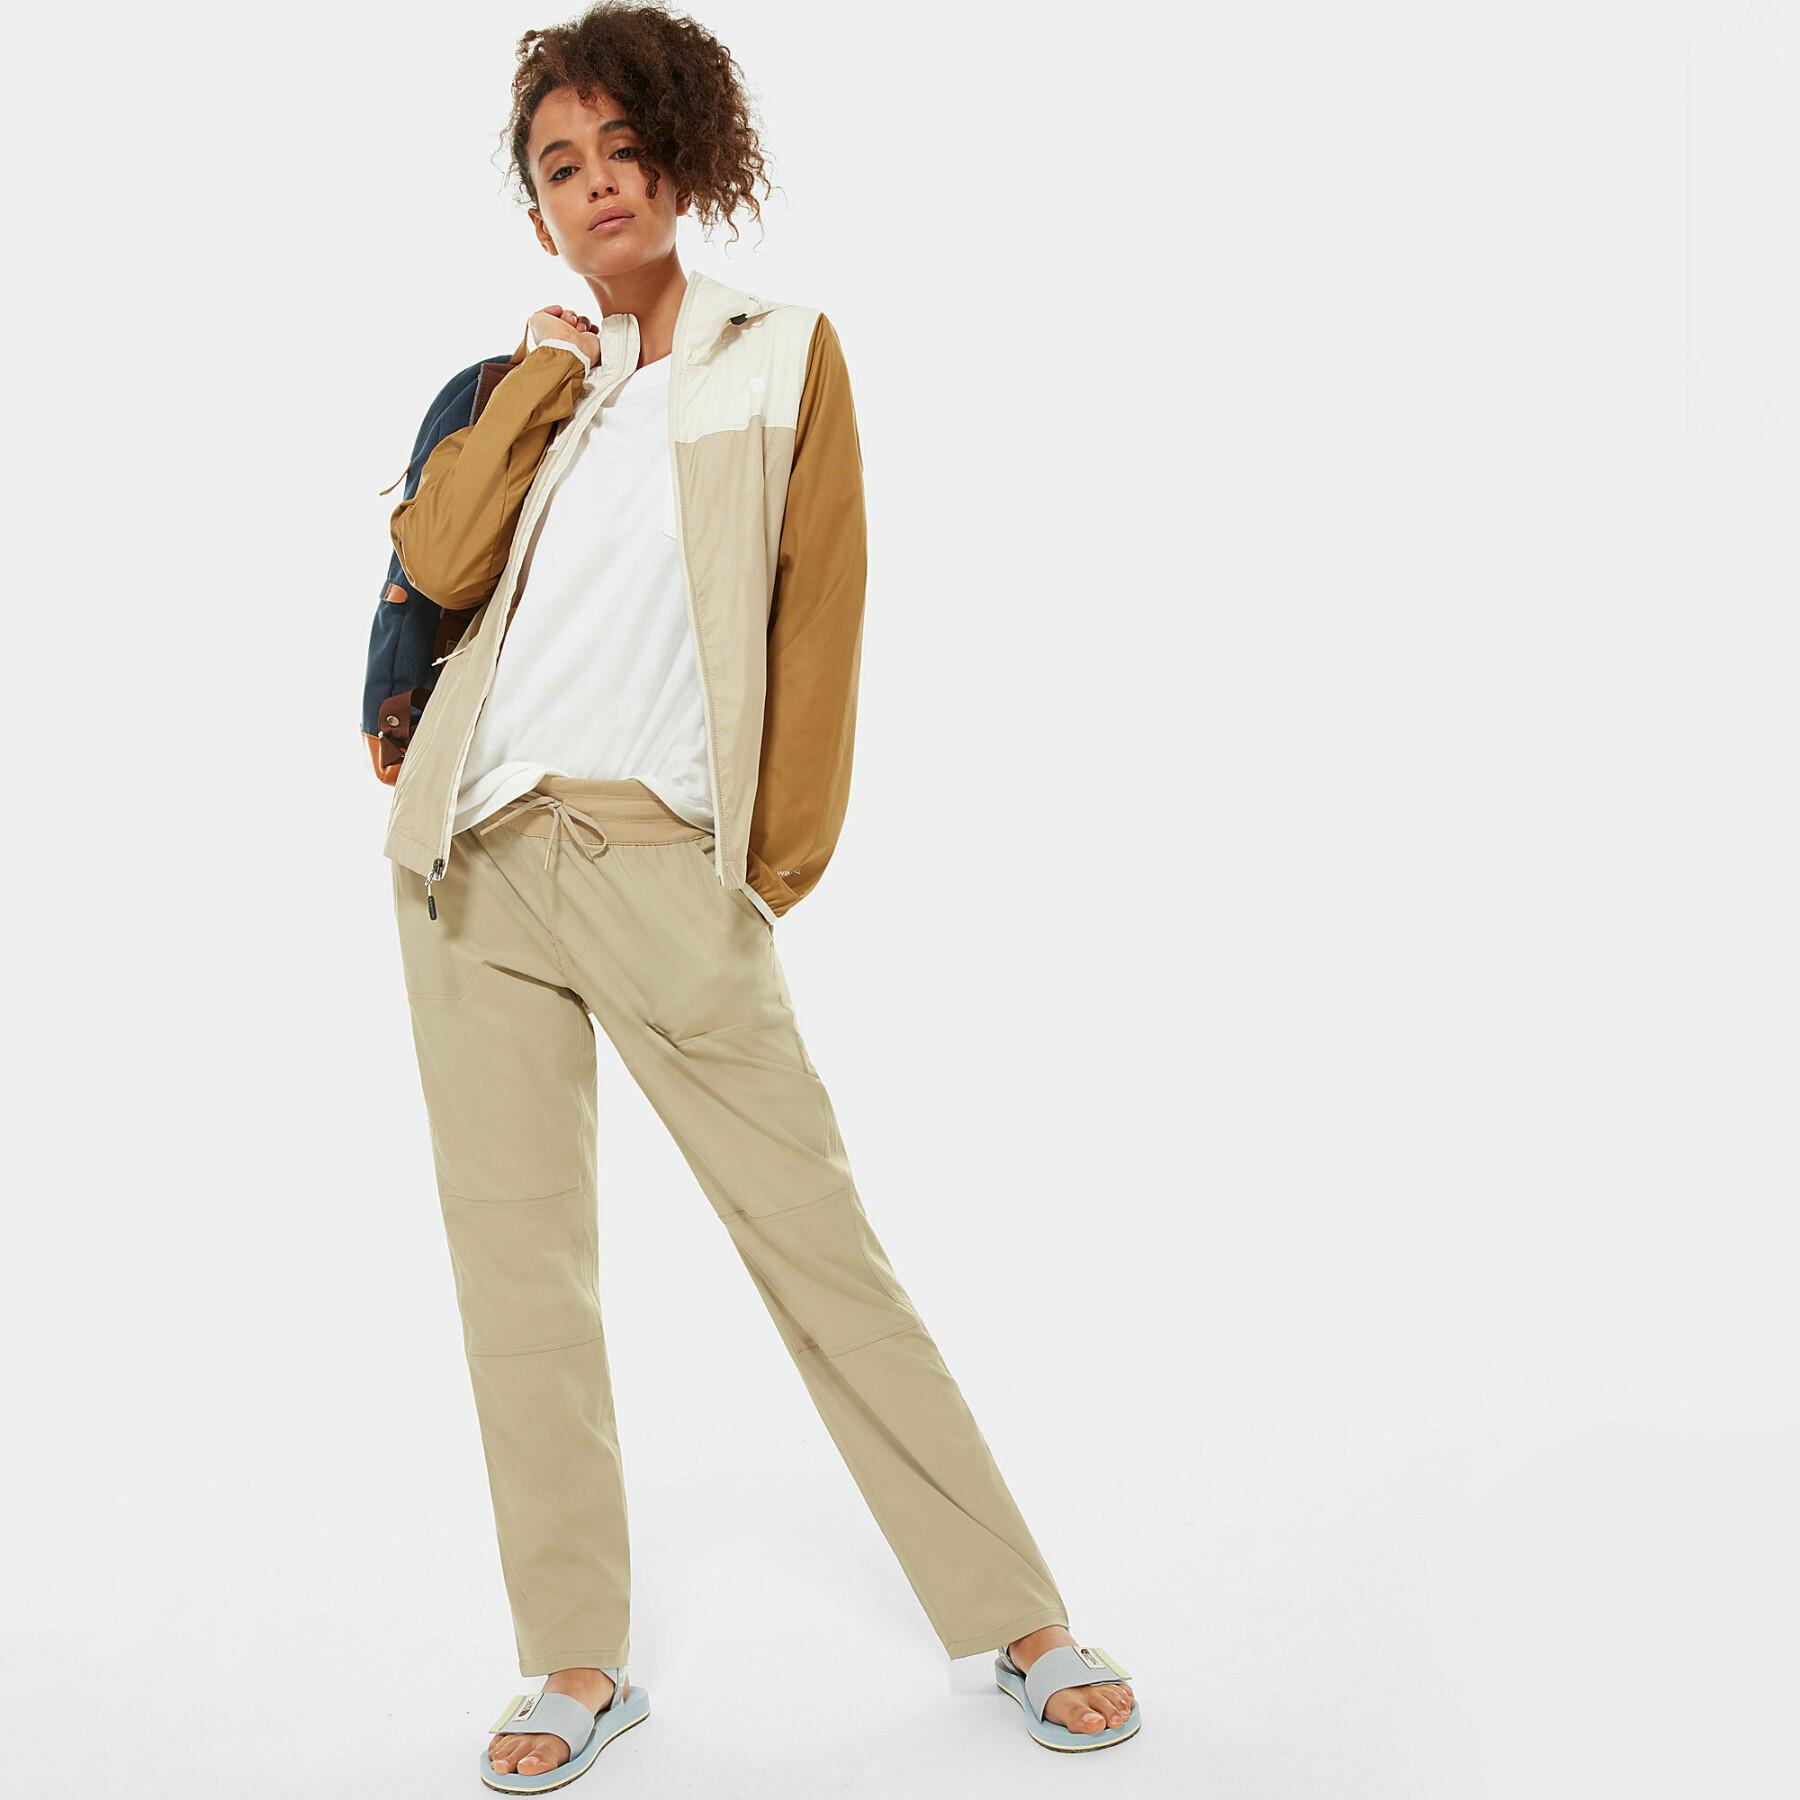 Women's trousers The North Face Aphrodite